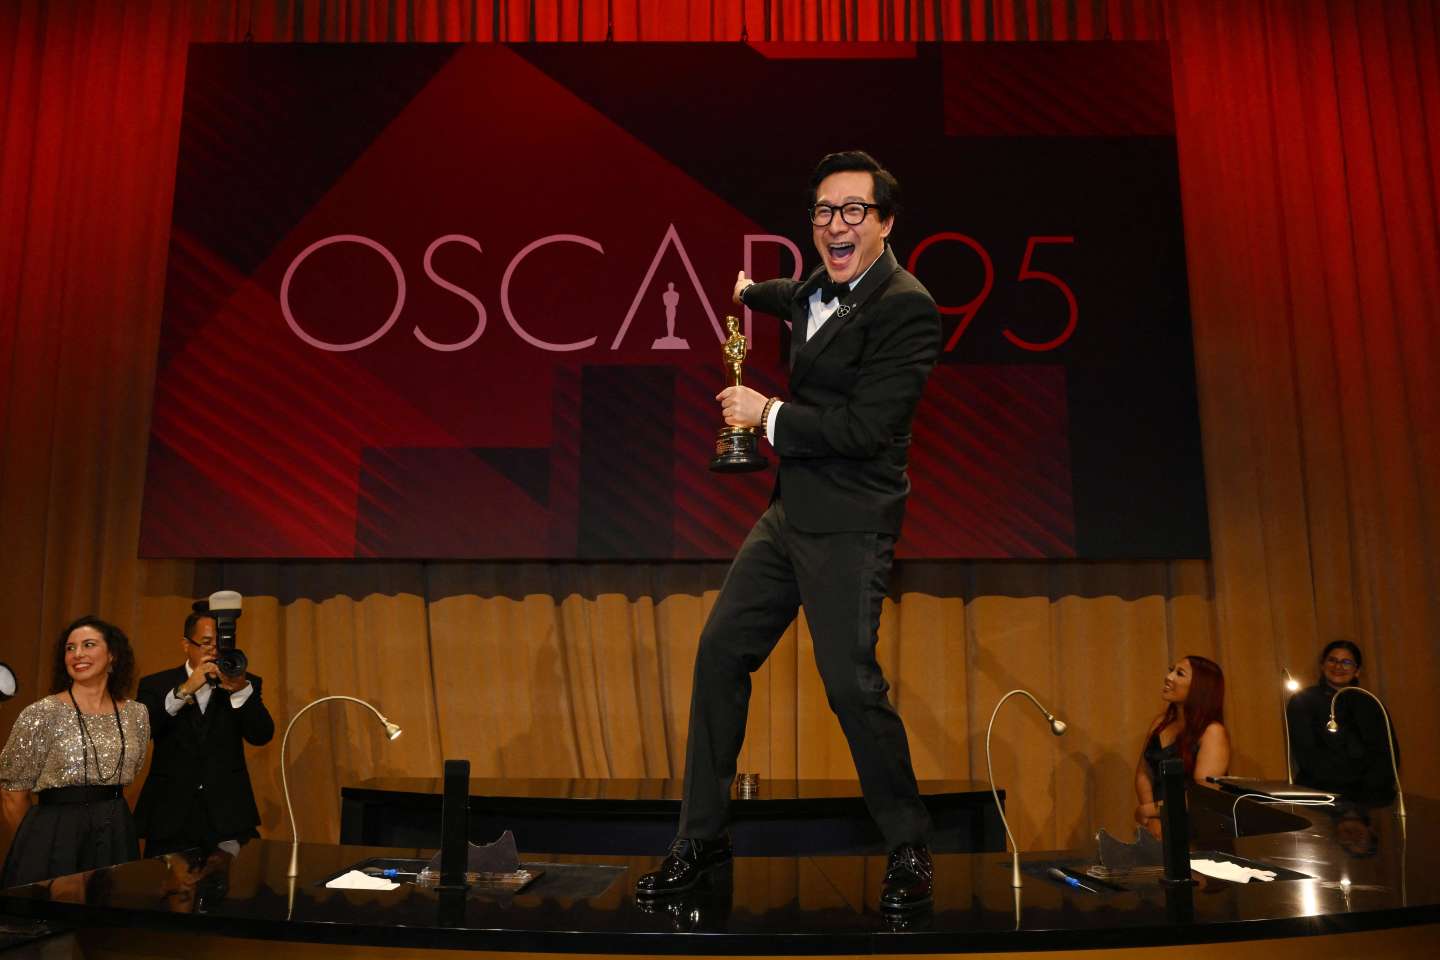 Oscars 2023: with “Everything Everywhere All at Once” the American film academy crowns an eccentric popular comedy